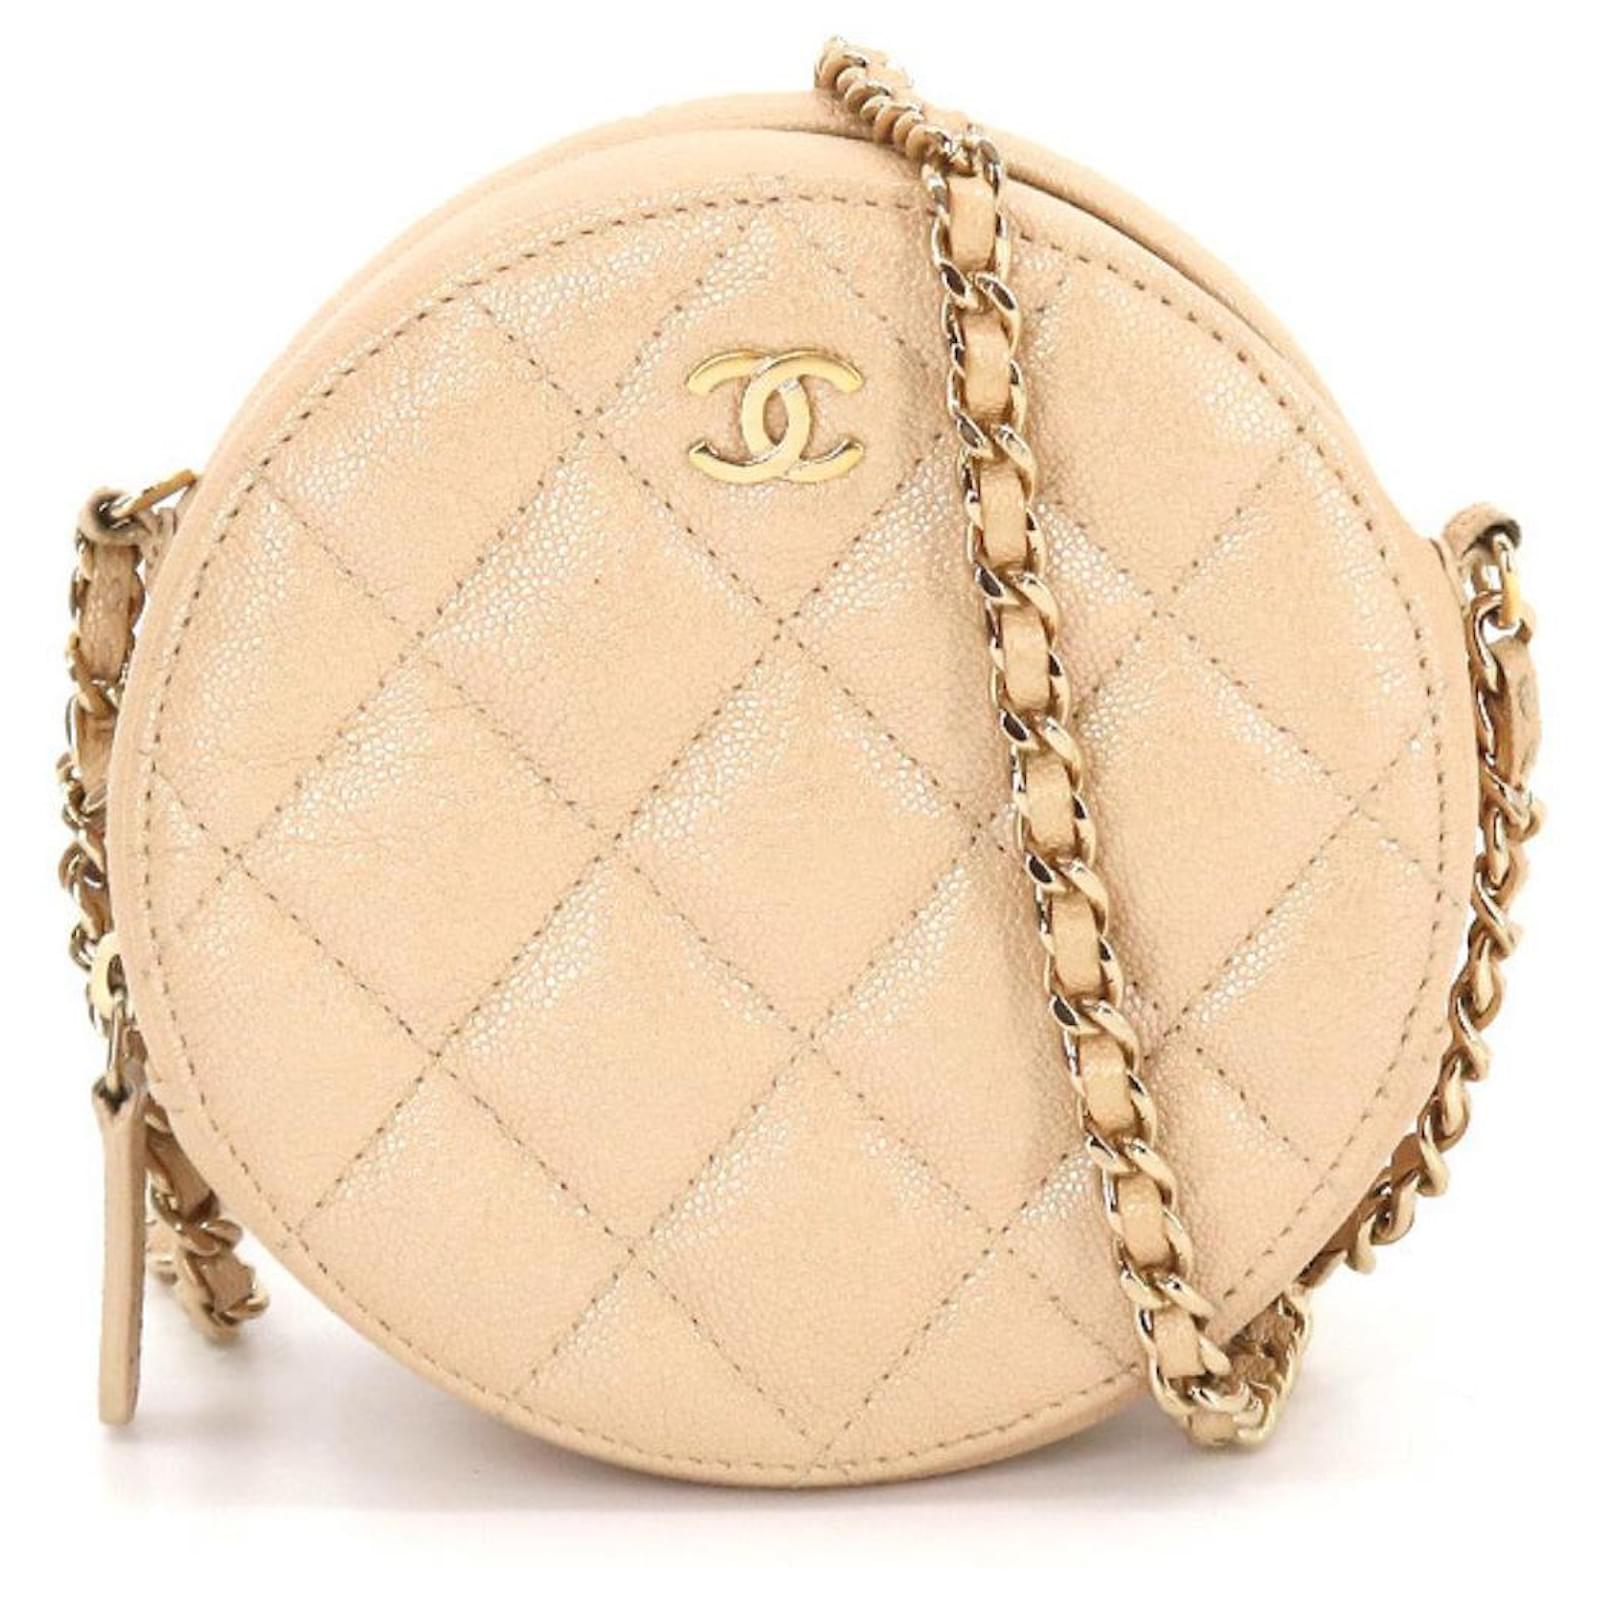 Chanel Round on Earth Shoulder Bag in Pink Quilted Grained Leather